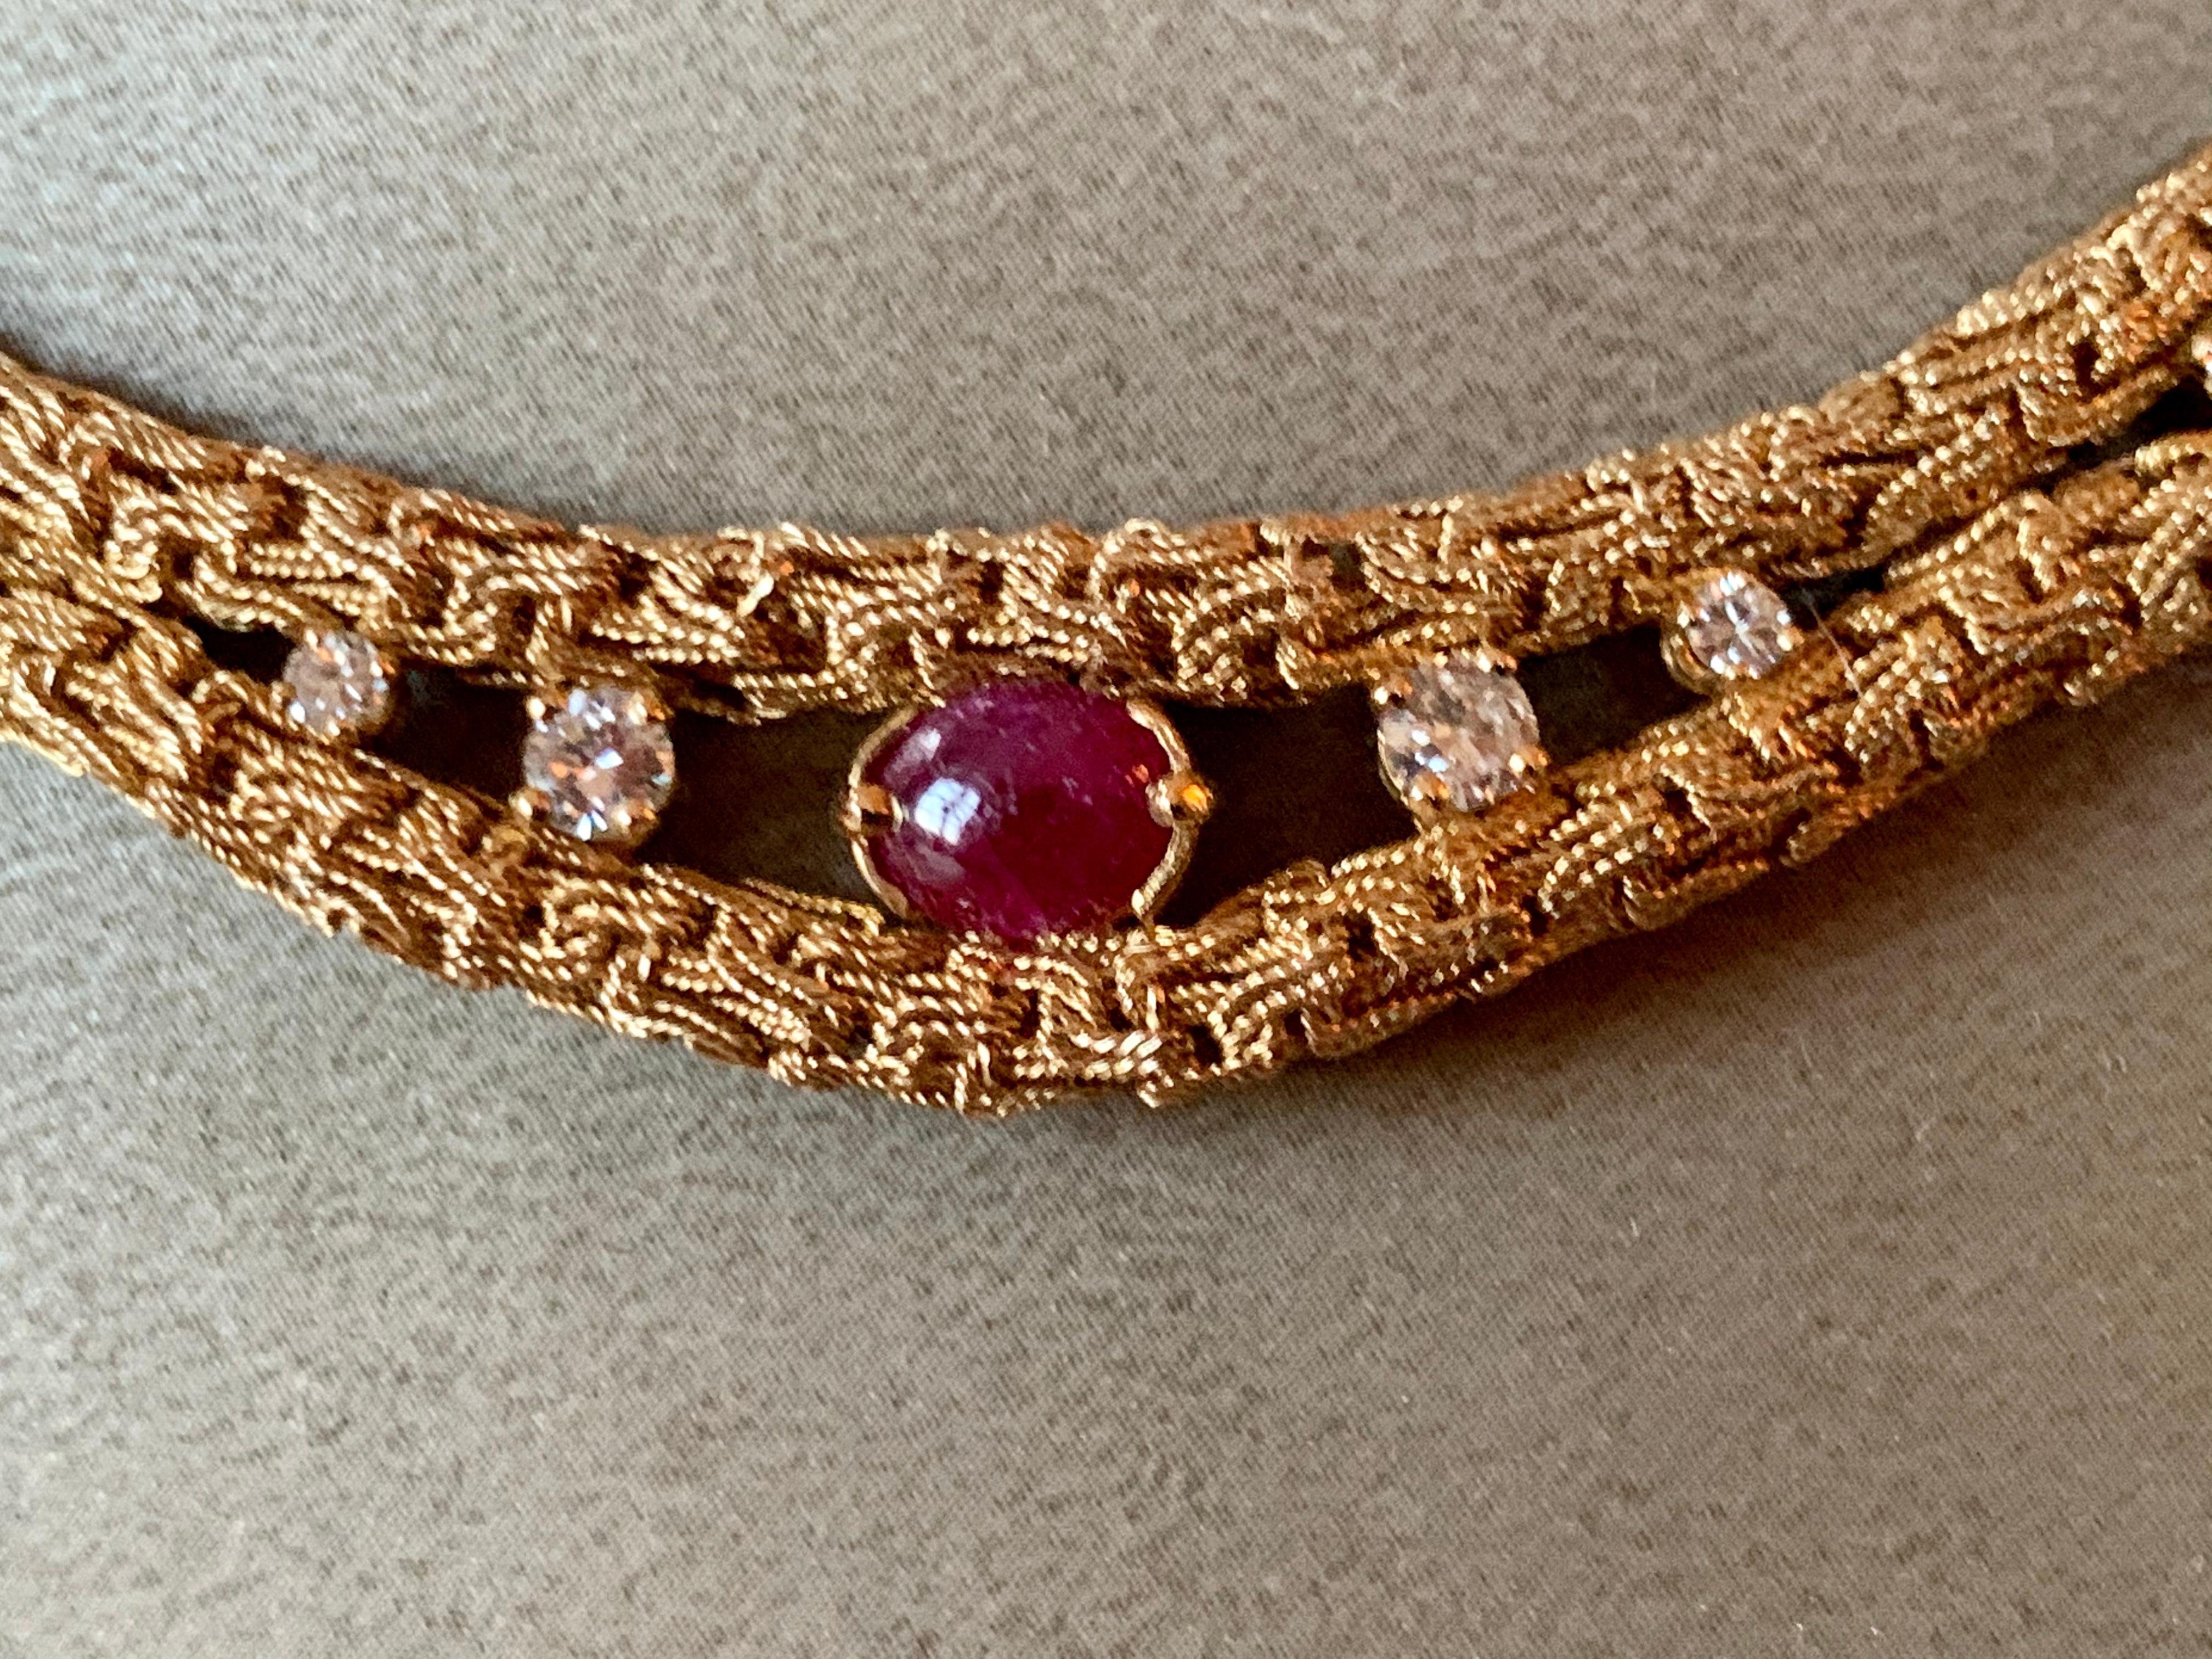 This wonderful necklace in 18 K yellow Gold shows some really intricate design with artistically twisted gold wires. It is set with 5 Ruby Cabochons weighing approximately 6 ct and decorated with 20 brilliant cut Diamonds weighing ca. 1 ct. 